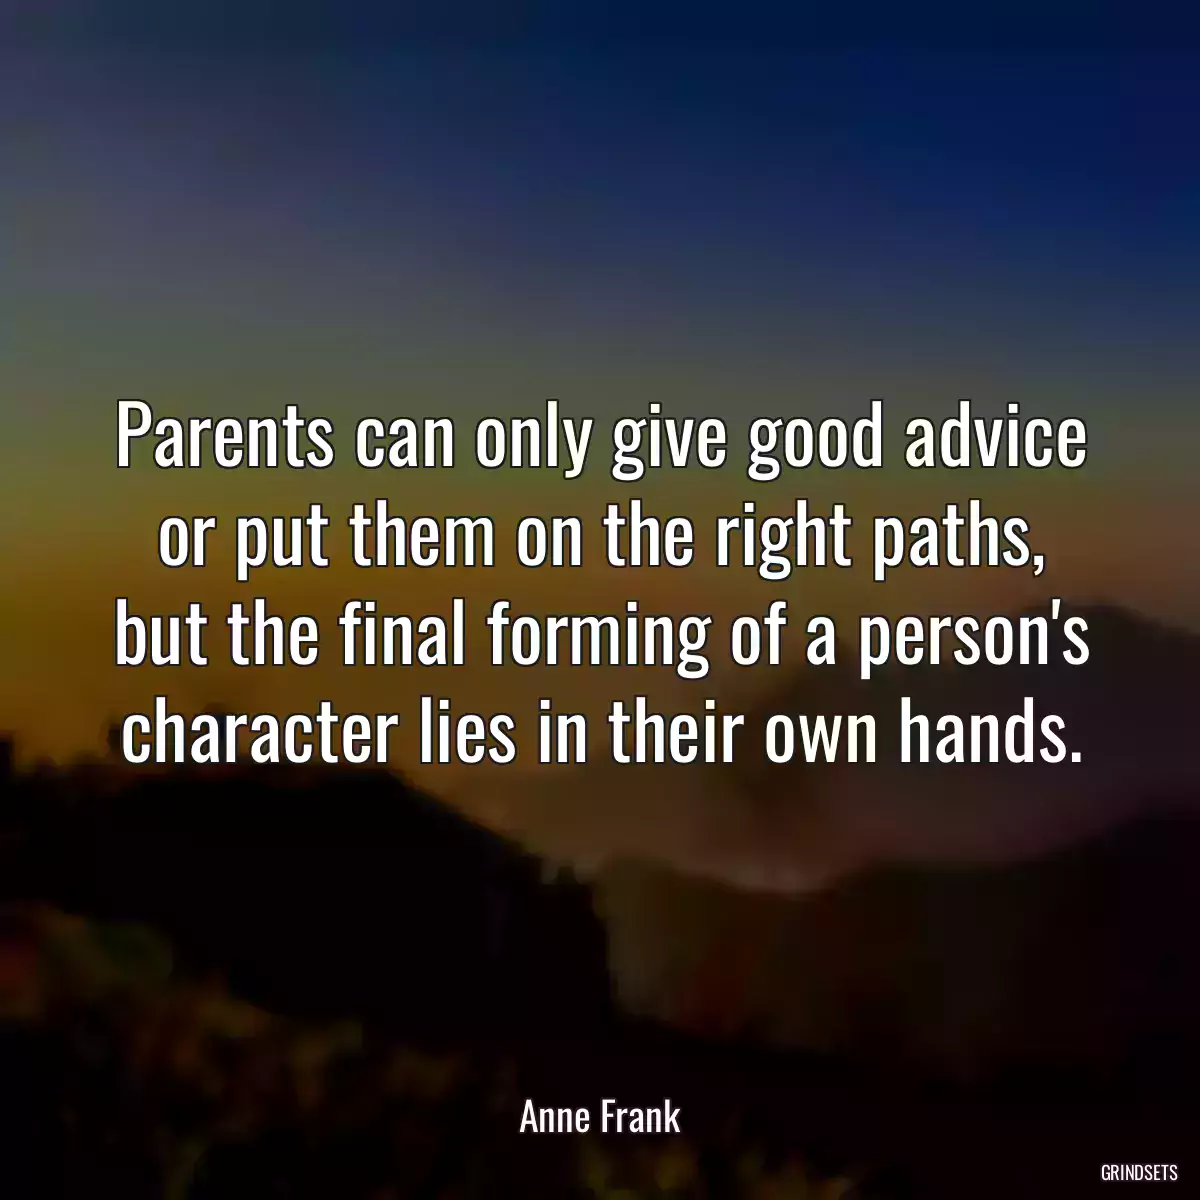 Parents can only give good advice or put them on the right paths, but the final forming of a person\'s character lies in their own hands.